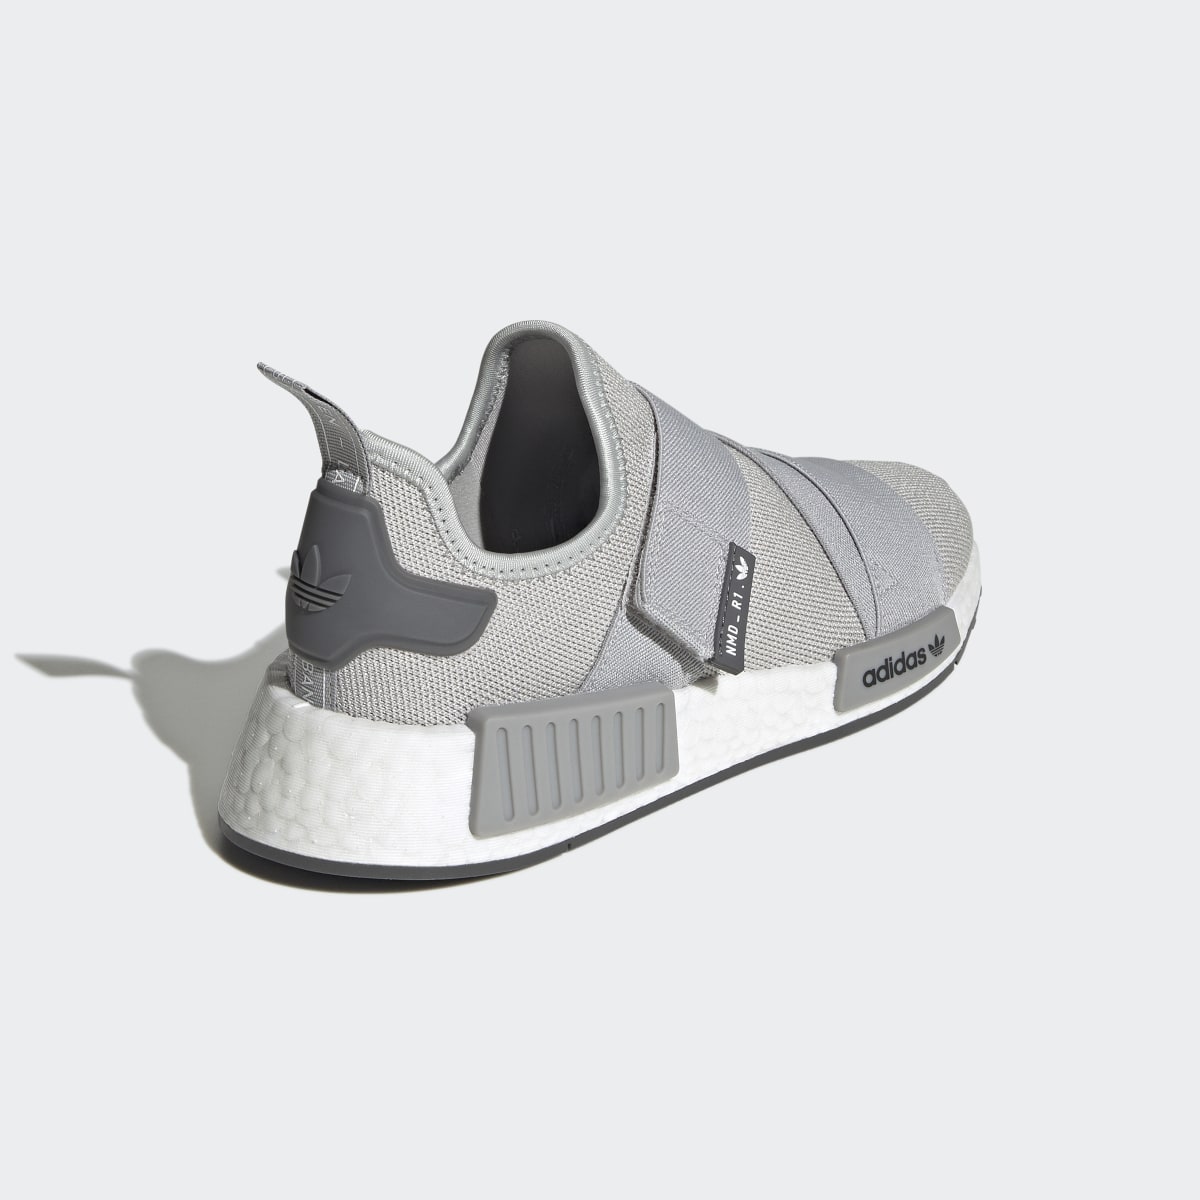 Adidas NMD_R1 Strap Shoes. 9